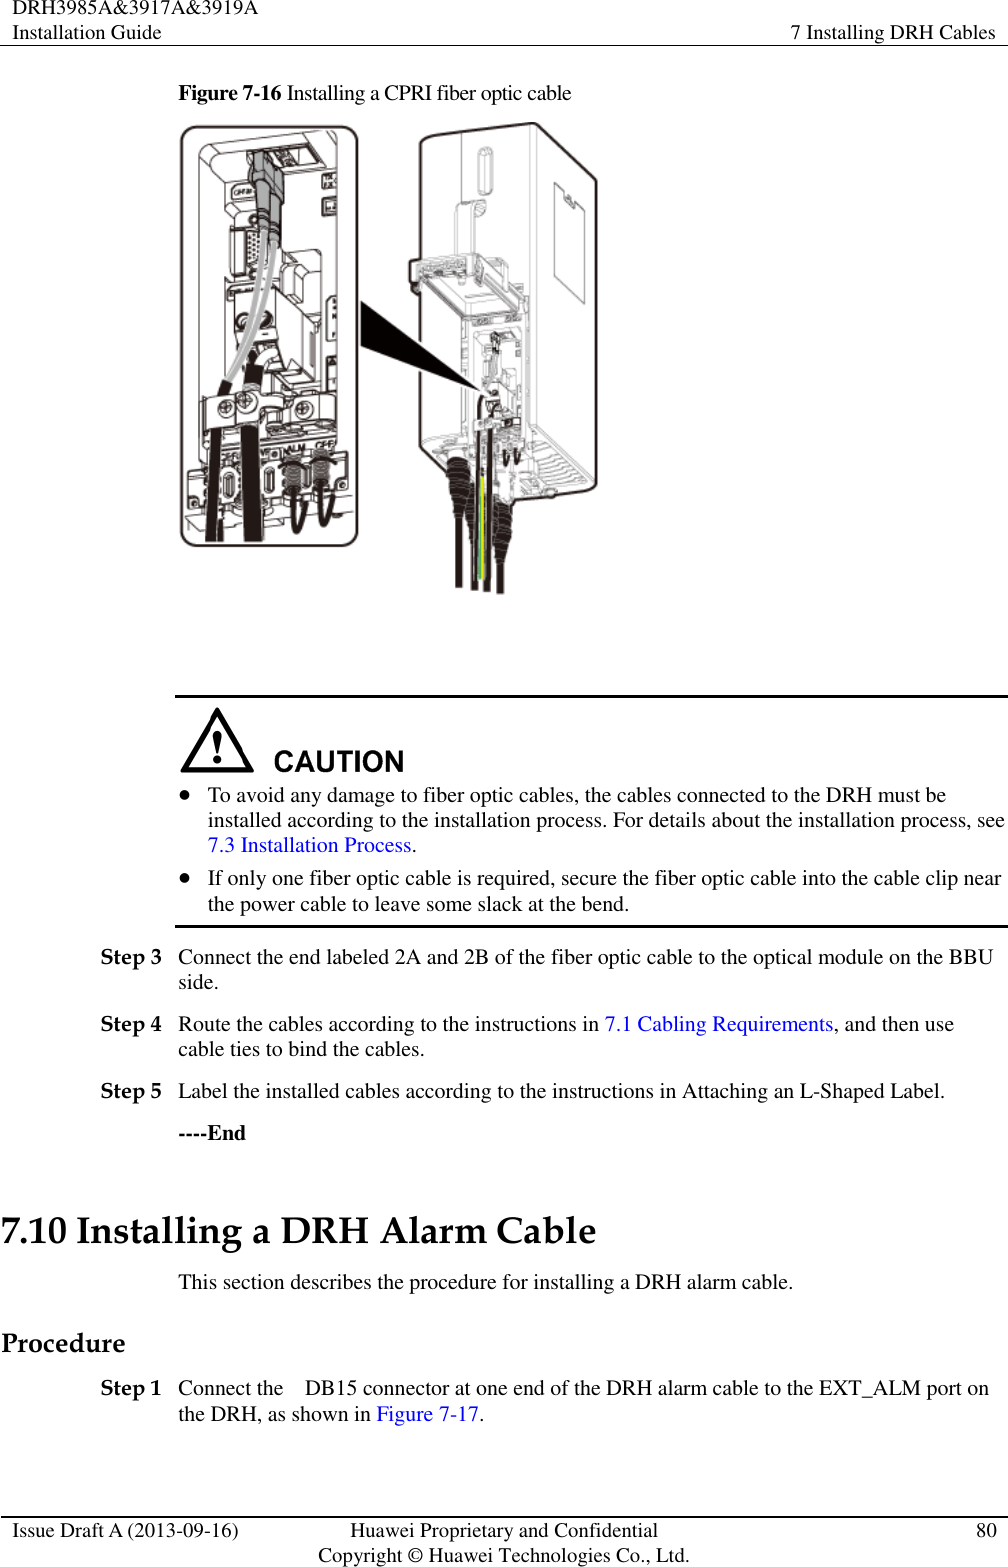 DRH3985A&amp;3917A&amp;3919A Installation Guide 7 Installing DRH Cables  Issue Draft A (2013-09-16) Huawei Proprietary and Confidential                                     Copyright © Huawei Technologies Co., Ltd. 80  Figure 7-16 Installing a CPRI fiber optic cable      To avoid any damage to fiber optic cables, the cables connected to the DRH must be installed according to the installation process. For details about the installation process, see 7.3 Installation Process.  If only one fiber optic cable is required, secure the fiber optic cable into the cable clip near the power cable to leave some slack at the bend. Step 3 Connect the end labeled 2A and 2B of the fiber optic cable to the optical module on the BBU side. Step 4 Route the cables according to the instructions in 7.1 Cabling Requirements, and then use cable ties to bind the cables. Step 5 Label the installed cables according to the instructions in Attaching an L-Shaped Label. ----End 7.10 Installing a DRH Alarm Cable This section describes the procedure for installing a DRH alarm cable. Procedure Step 1 Connect the    DB15 connector at one end of the DRH alarm cable to the EXT_ALM port on the DRH, as shown in Figure 7-17. 